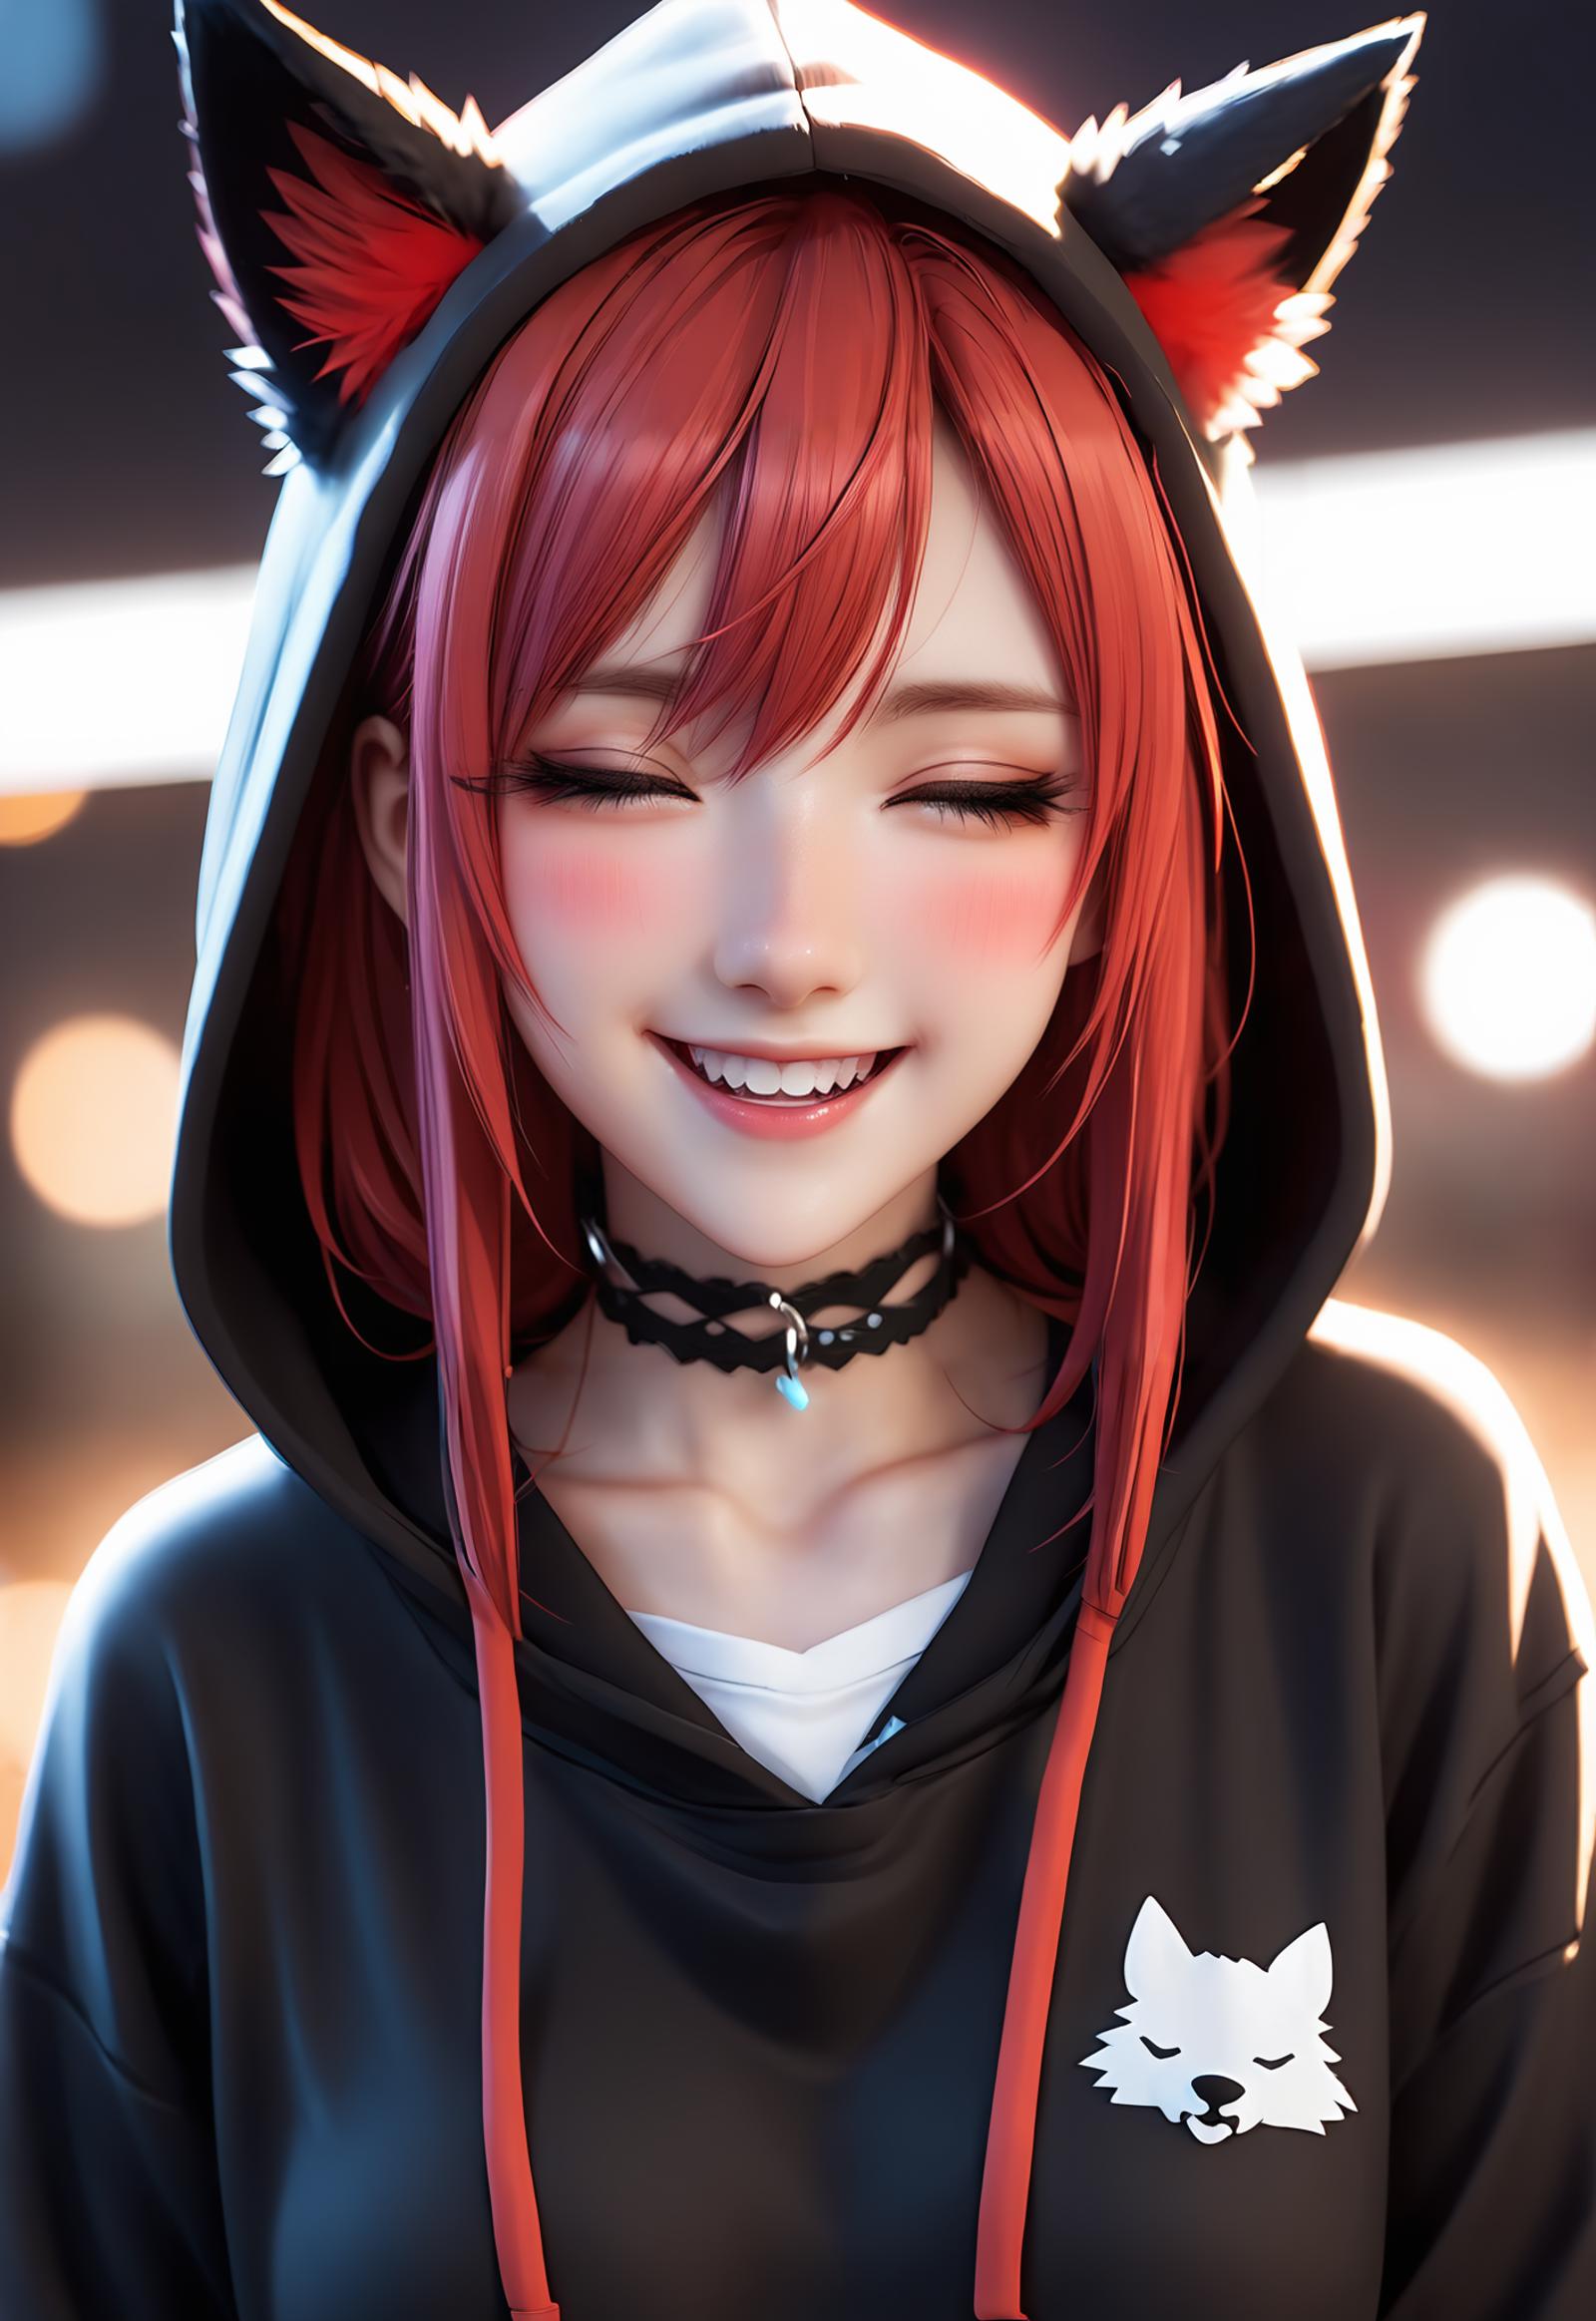 A cheerful anime girl with red hair and a black hoodie poses for a photo.